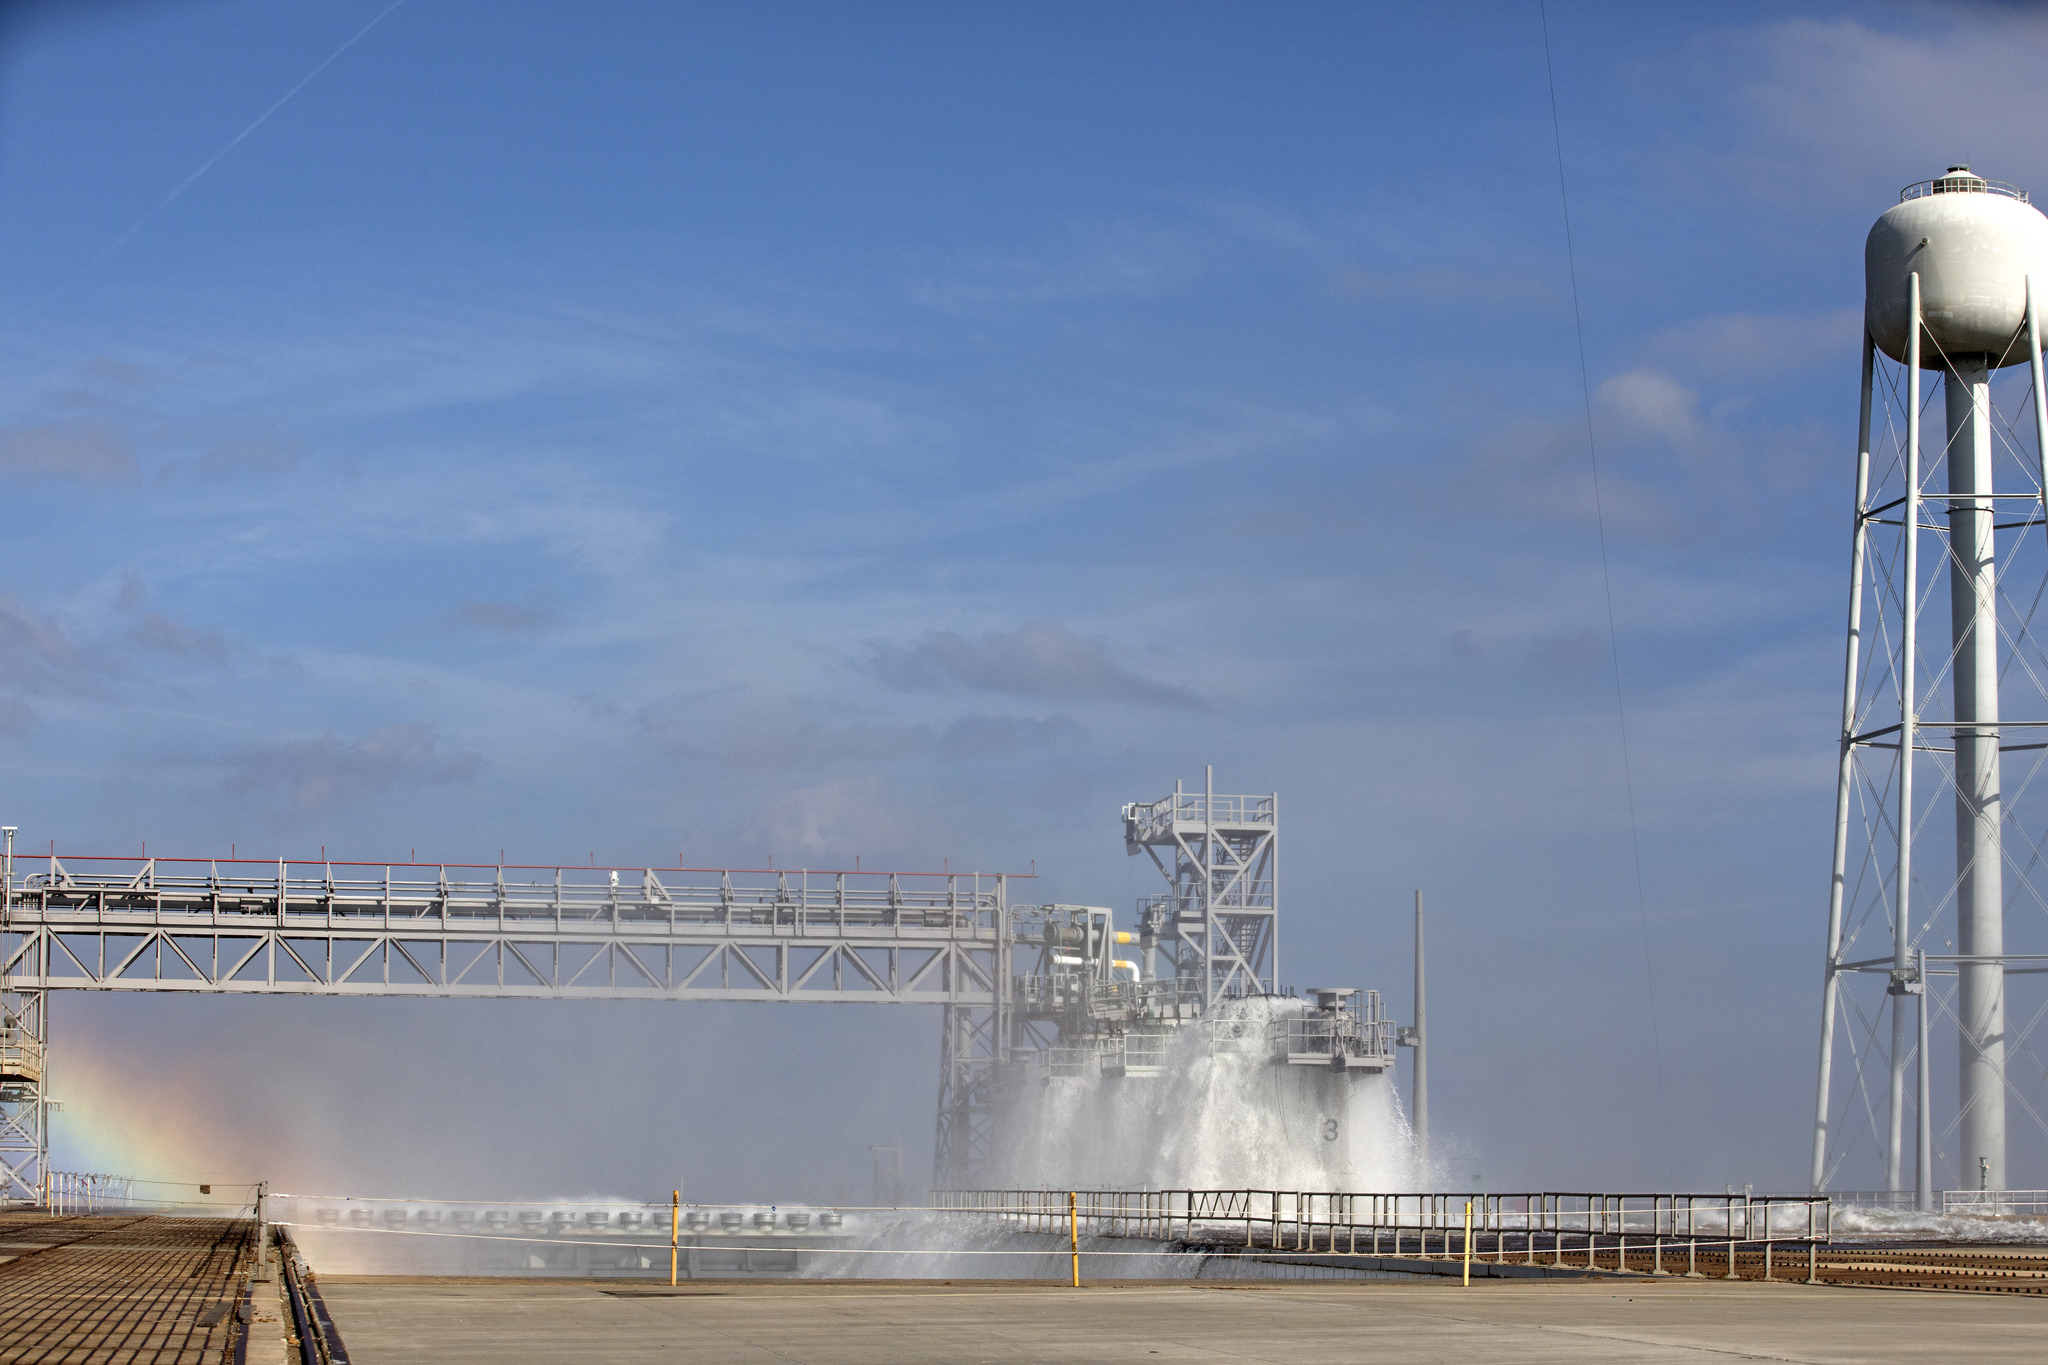 A water deluge test takes place at Launch Pad 39B at Kennedy Space Center.